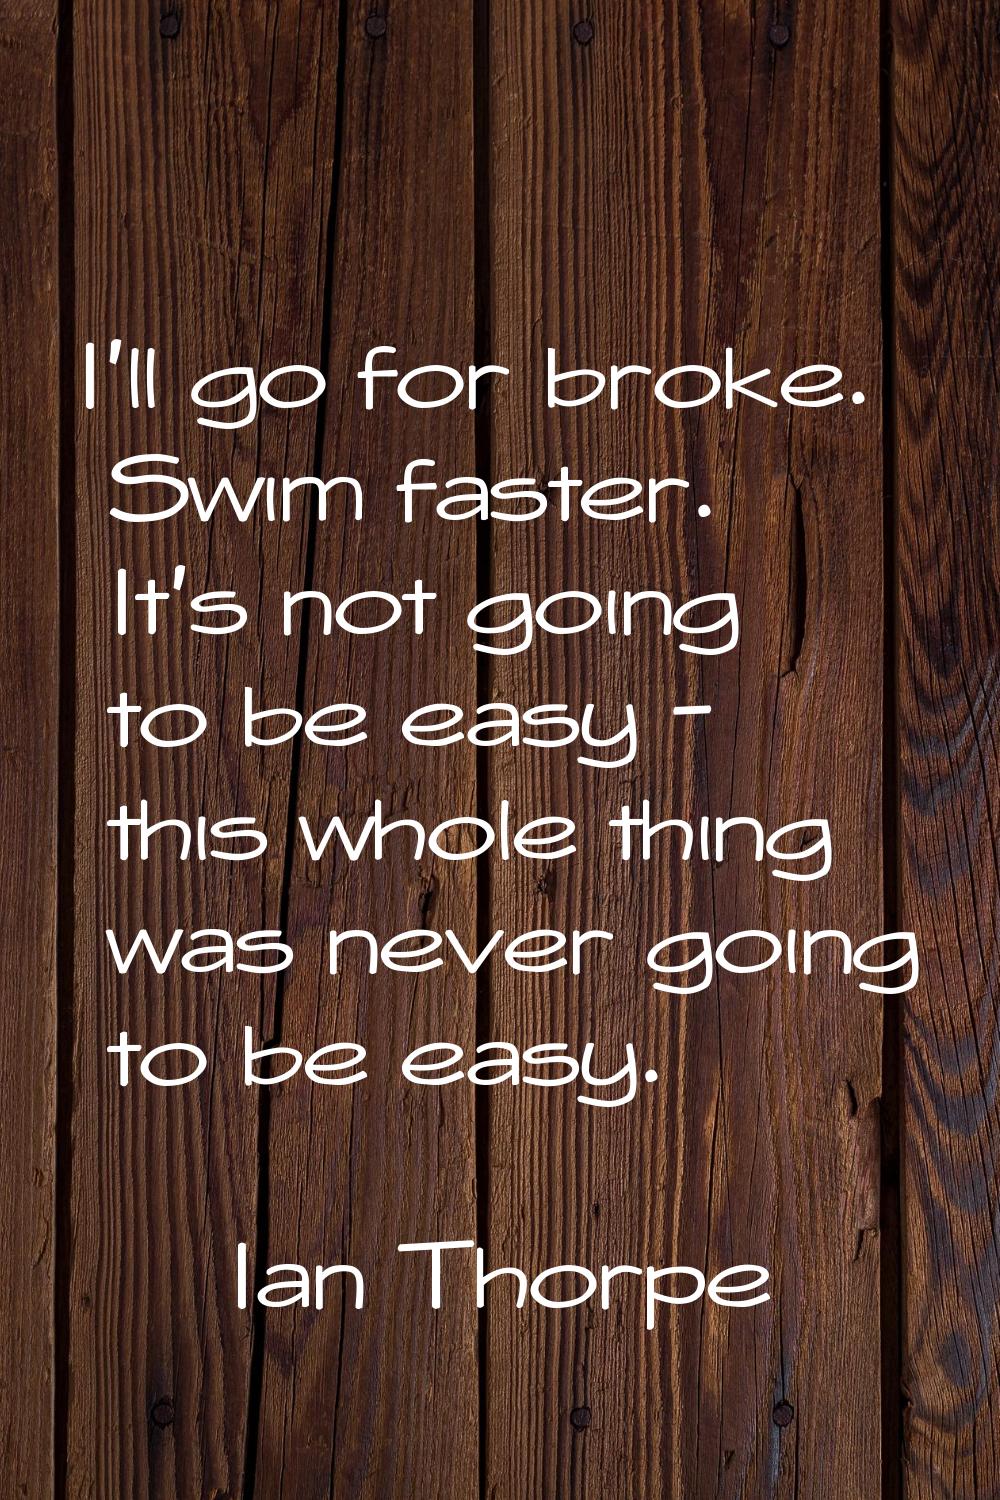 I'll go for broke. Swim faster. It's not going to be easy - this whole thing was never going to be 